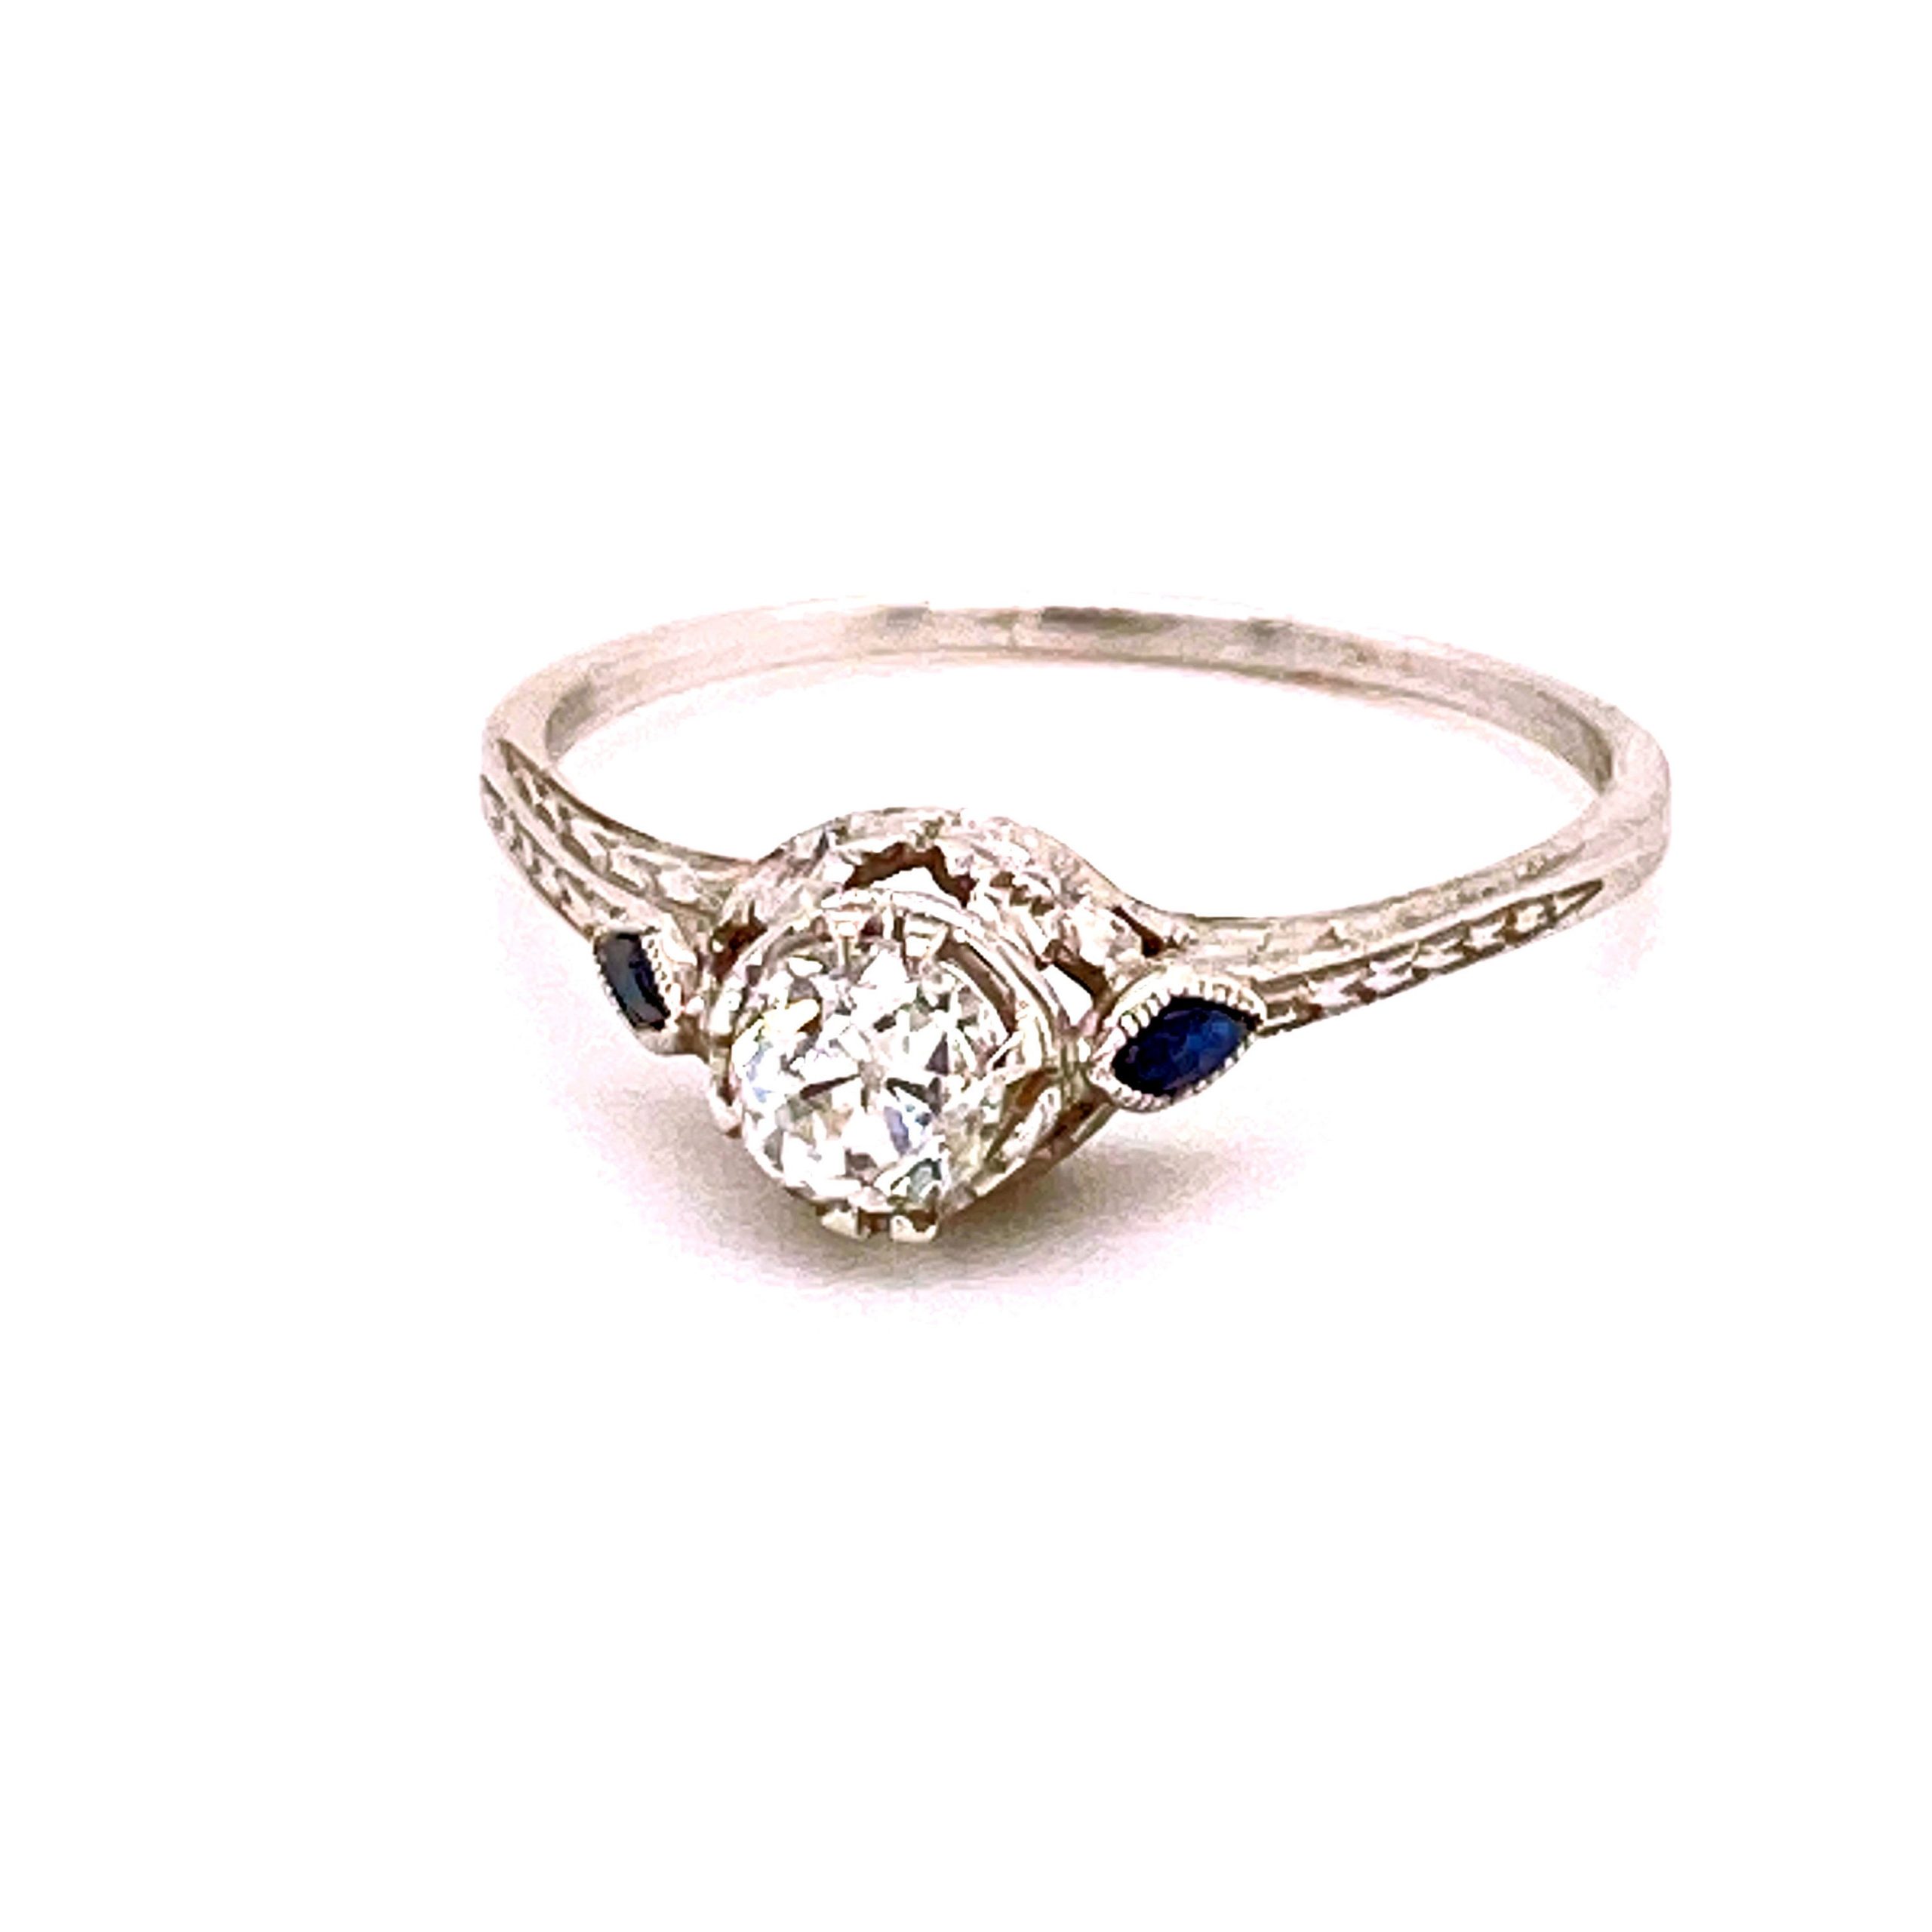 Twisted White Gold Engagement Ring With Round Cut Diamond : Cape Diamonds